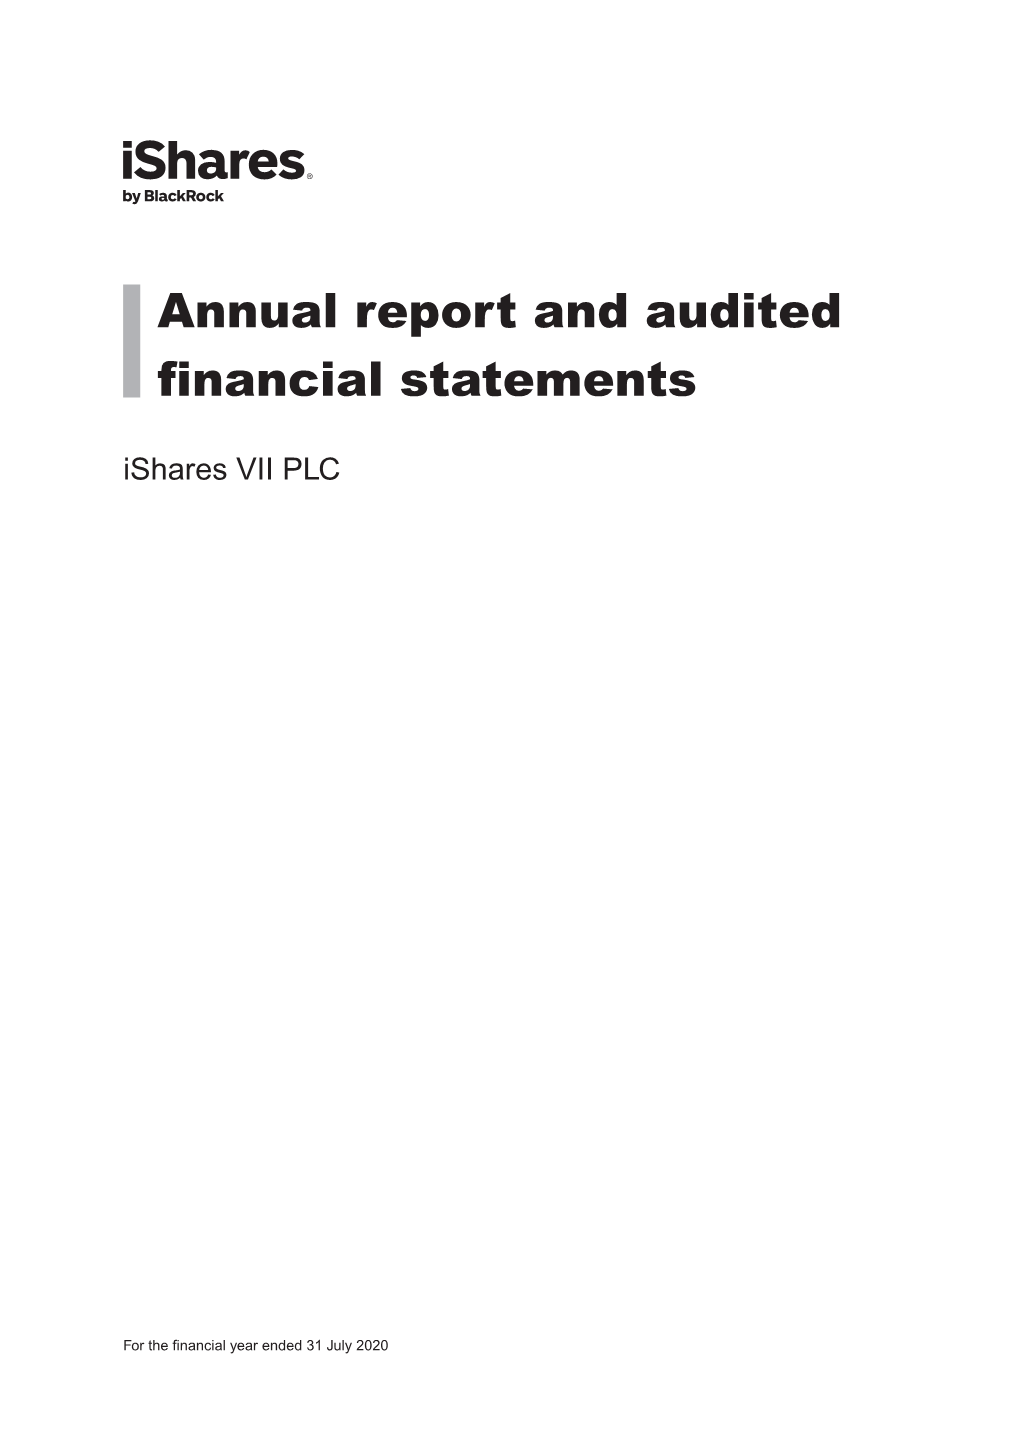 Annual Report and Audited Financial Statements (English)